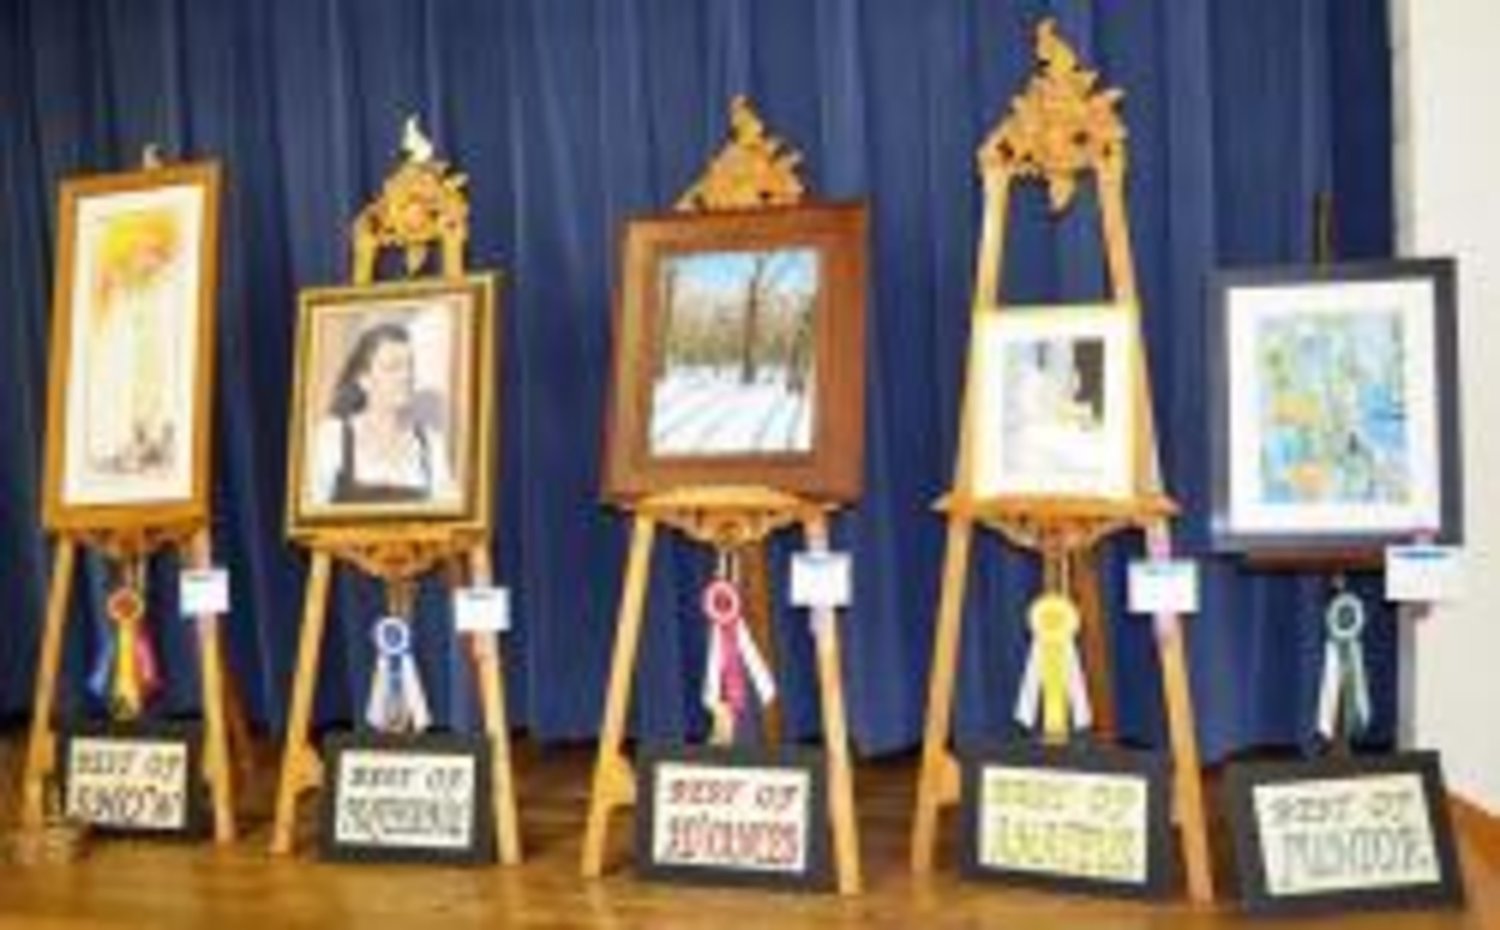 Top winners in the Mineola League of the Arts Art Show this past weekend included Helen Smith's "Aspens" (water media), Best of Show Best Professional, Paula Hodge, Oil, "Nadine;" Best of Advanced, Linda Price, Oil, "Winter Wonderland; " Best of Amateur, Laura Cottrell, Pastels, "Reflection of an Orange;" Best of Junior, Brailey Brown and Watercolor, "World of Fish."